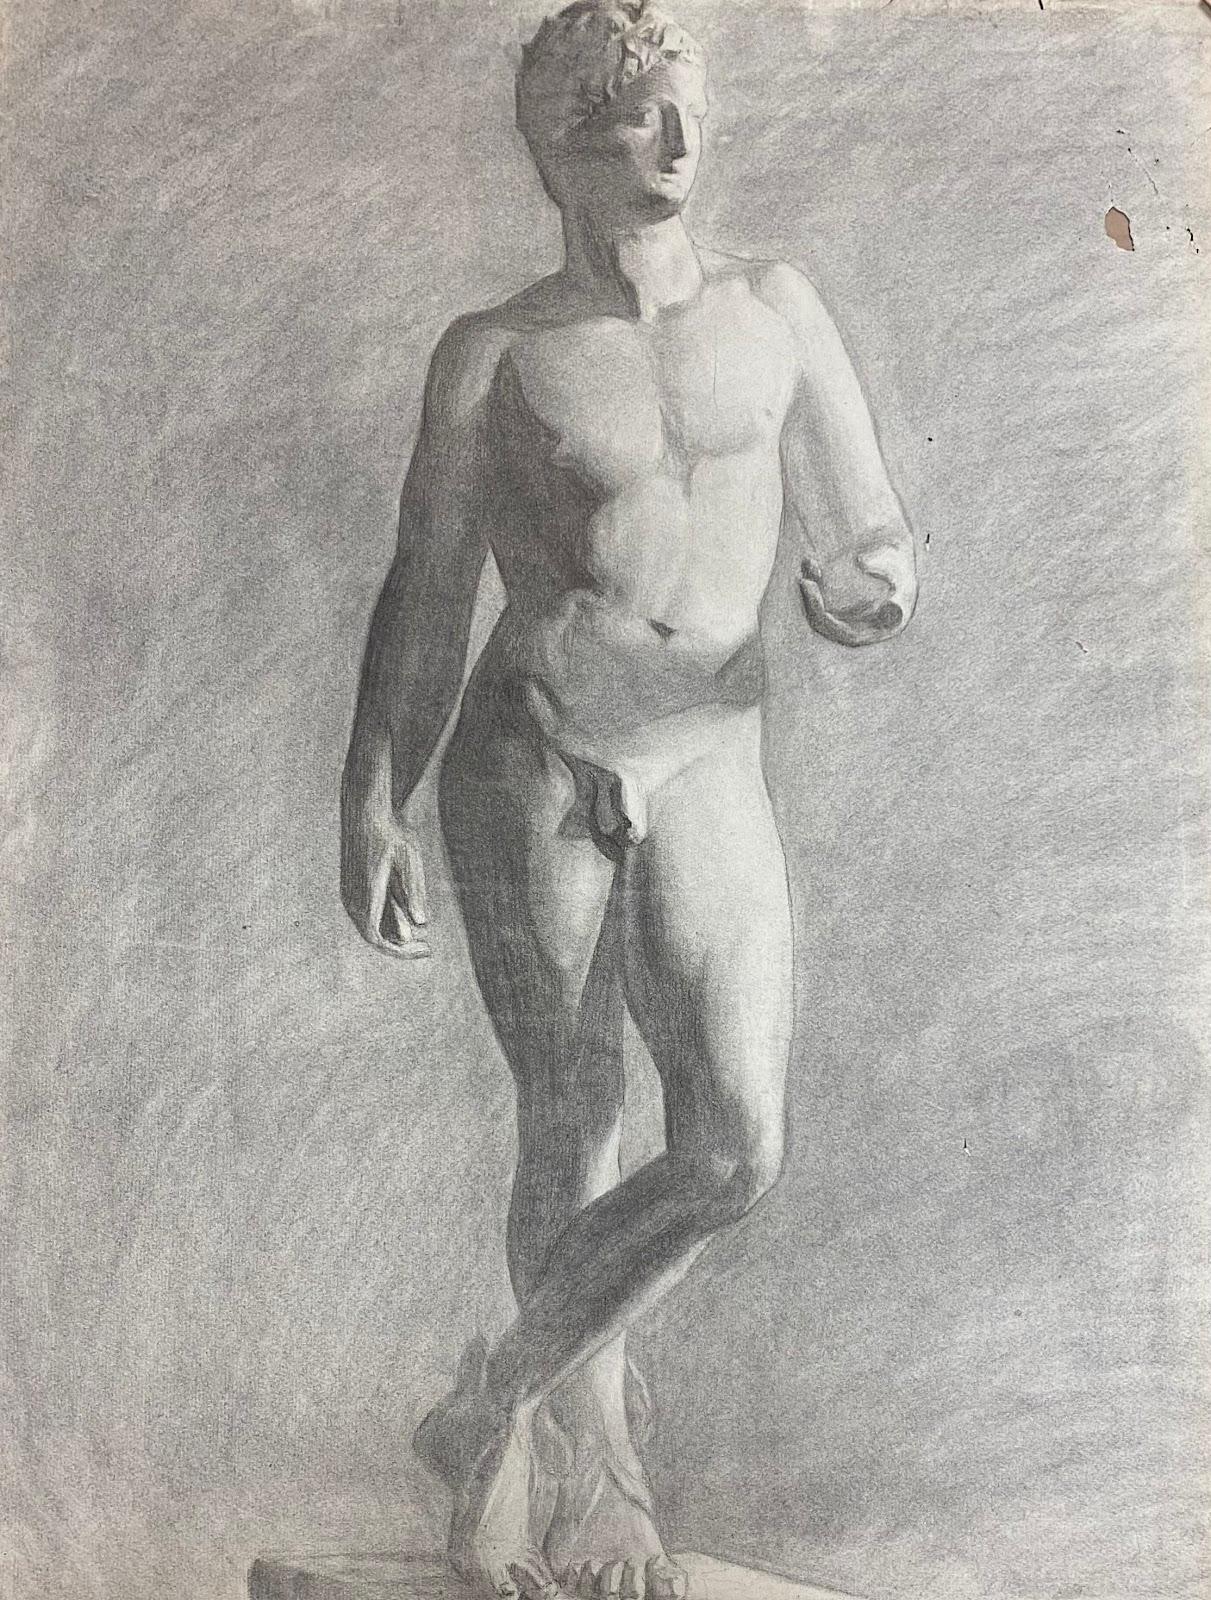 1900s French Atelier Academic Drawing Portrait of Classic Male Nude Sculpture